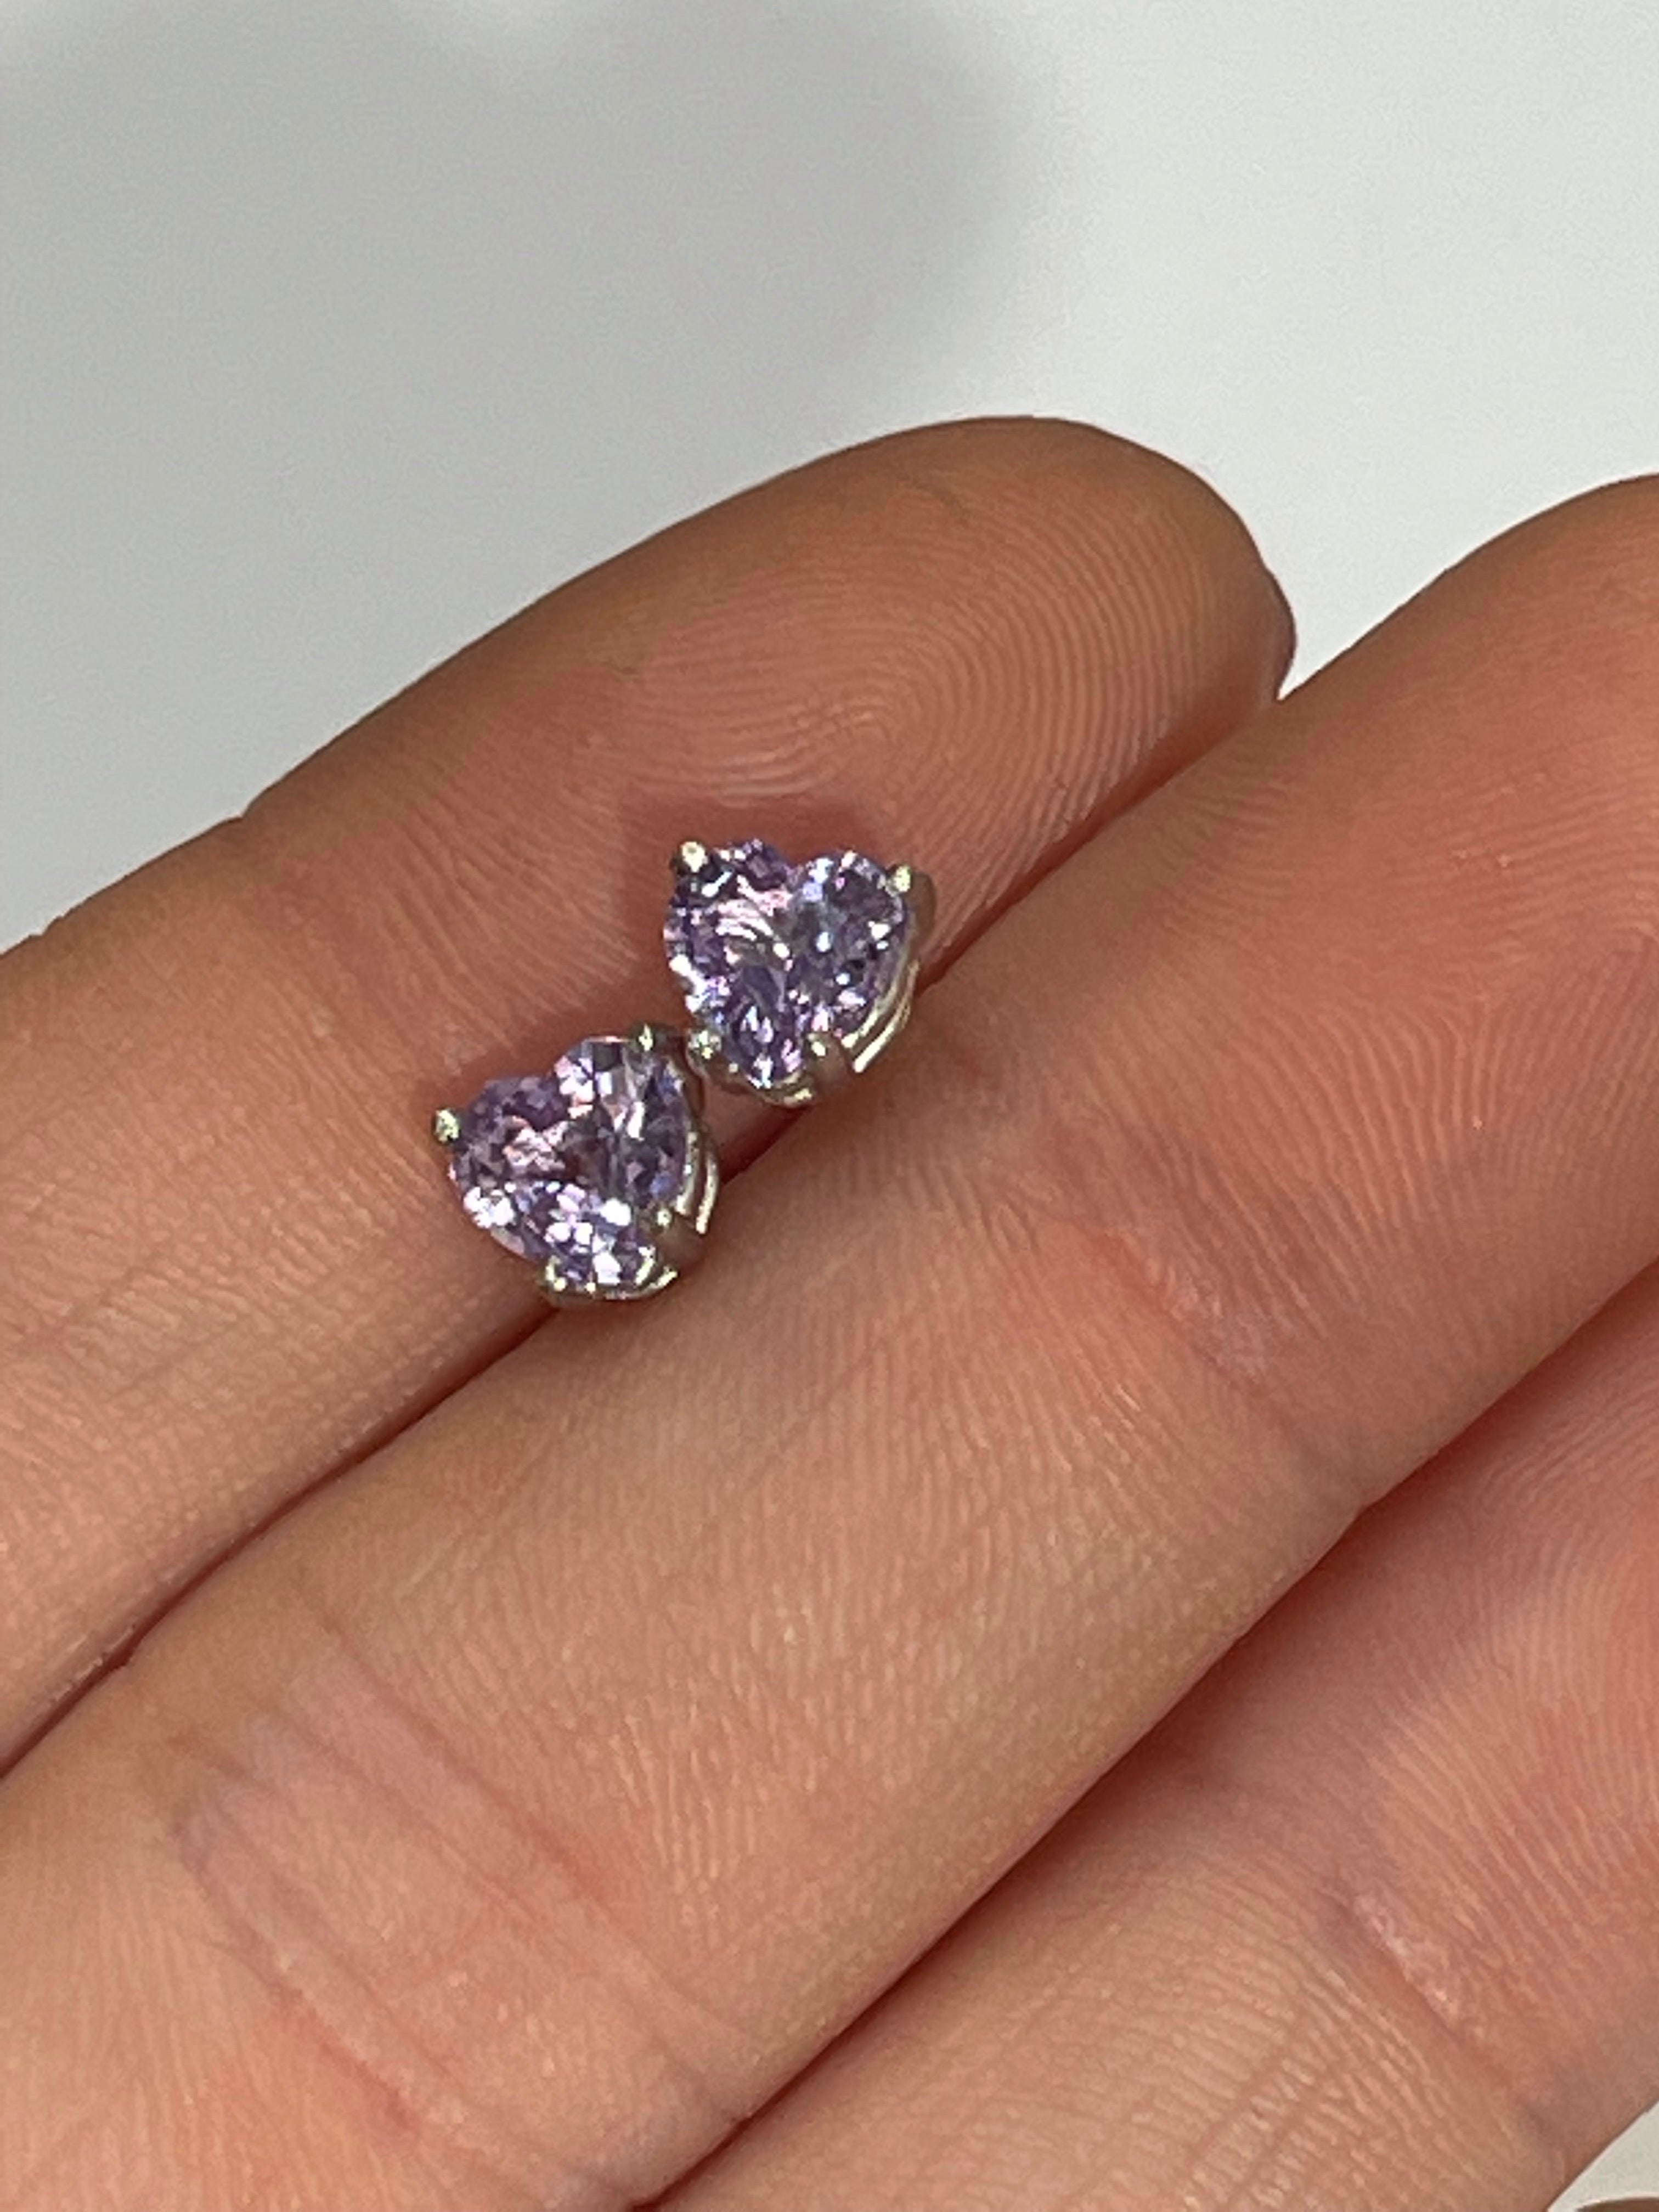 1.8 CT Natural Purple Sapphire Heart Earring Studs 14K White Gold